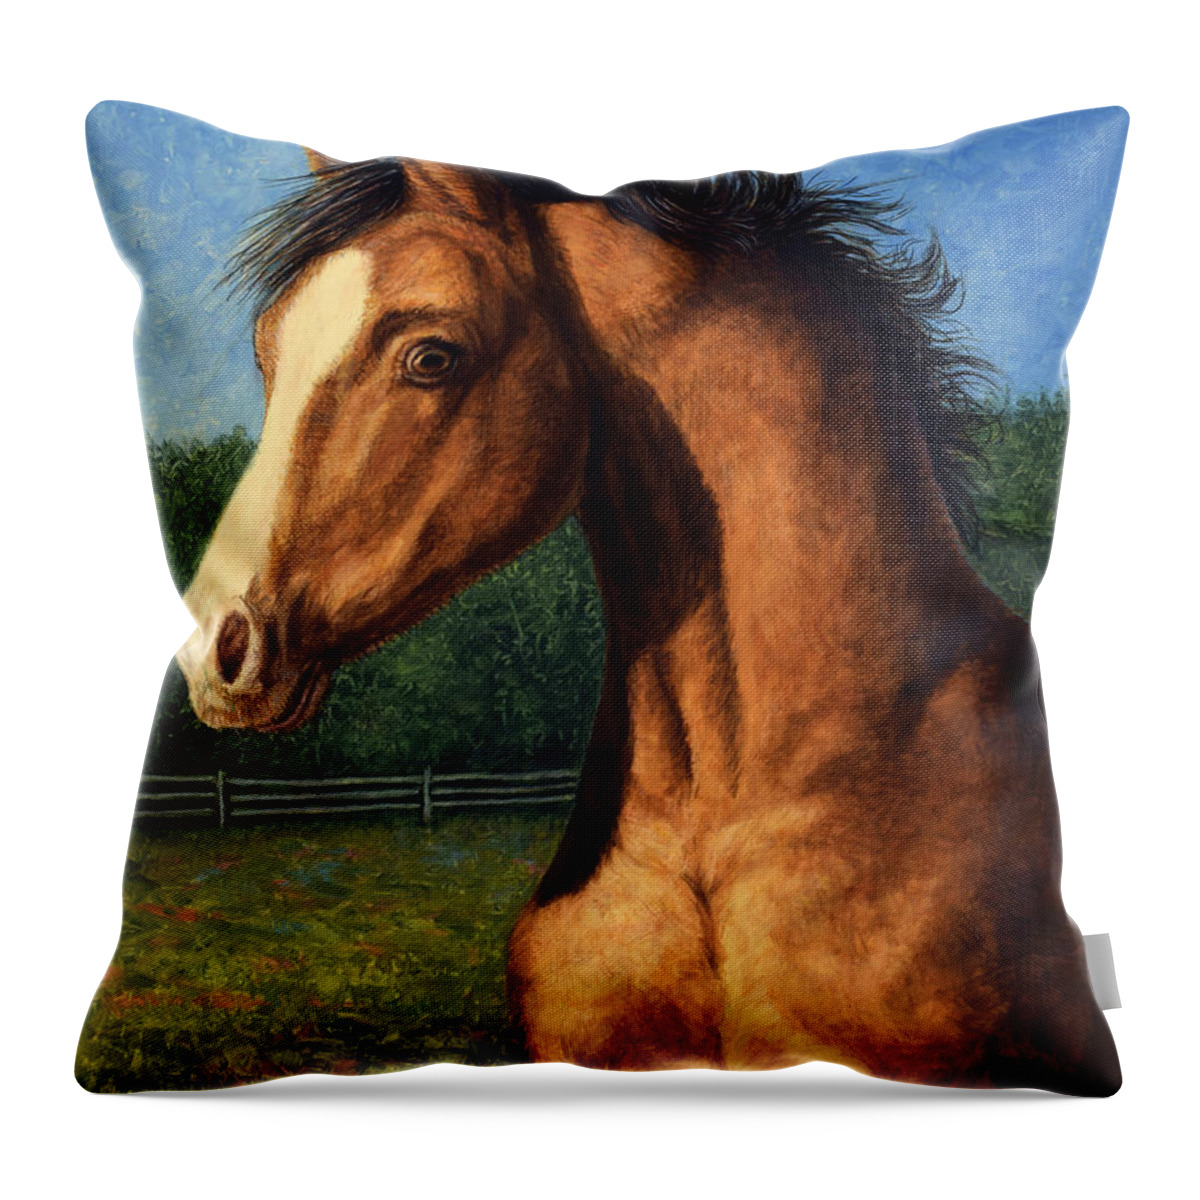 Horse Throw Pillow featuring the painting Stir Crazy by James W Johnson